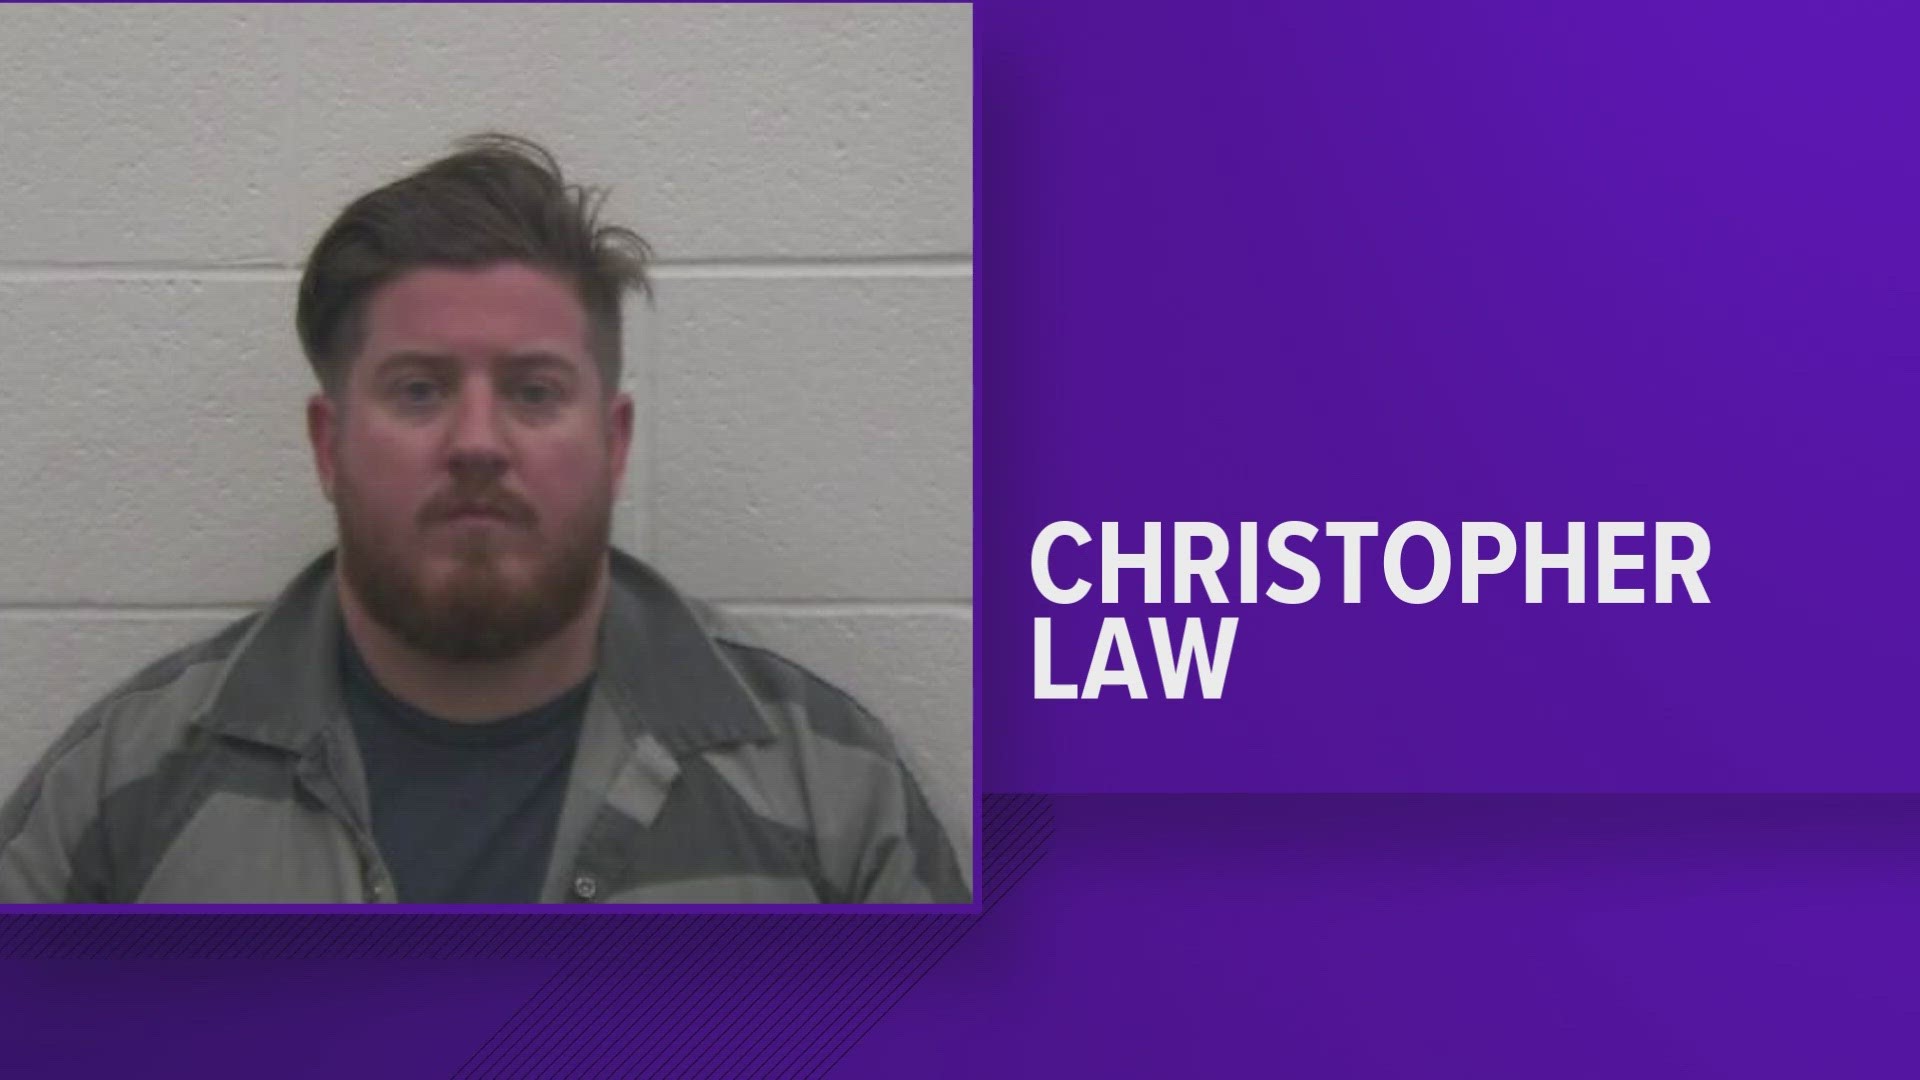 A warrant said Christopher Law was asked to leave a retirement party after getting too drunk, before yelling at the victim and causing them to fear for their life.